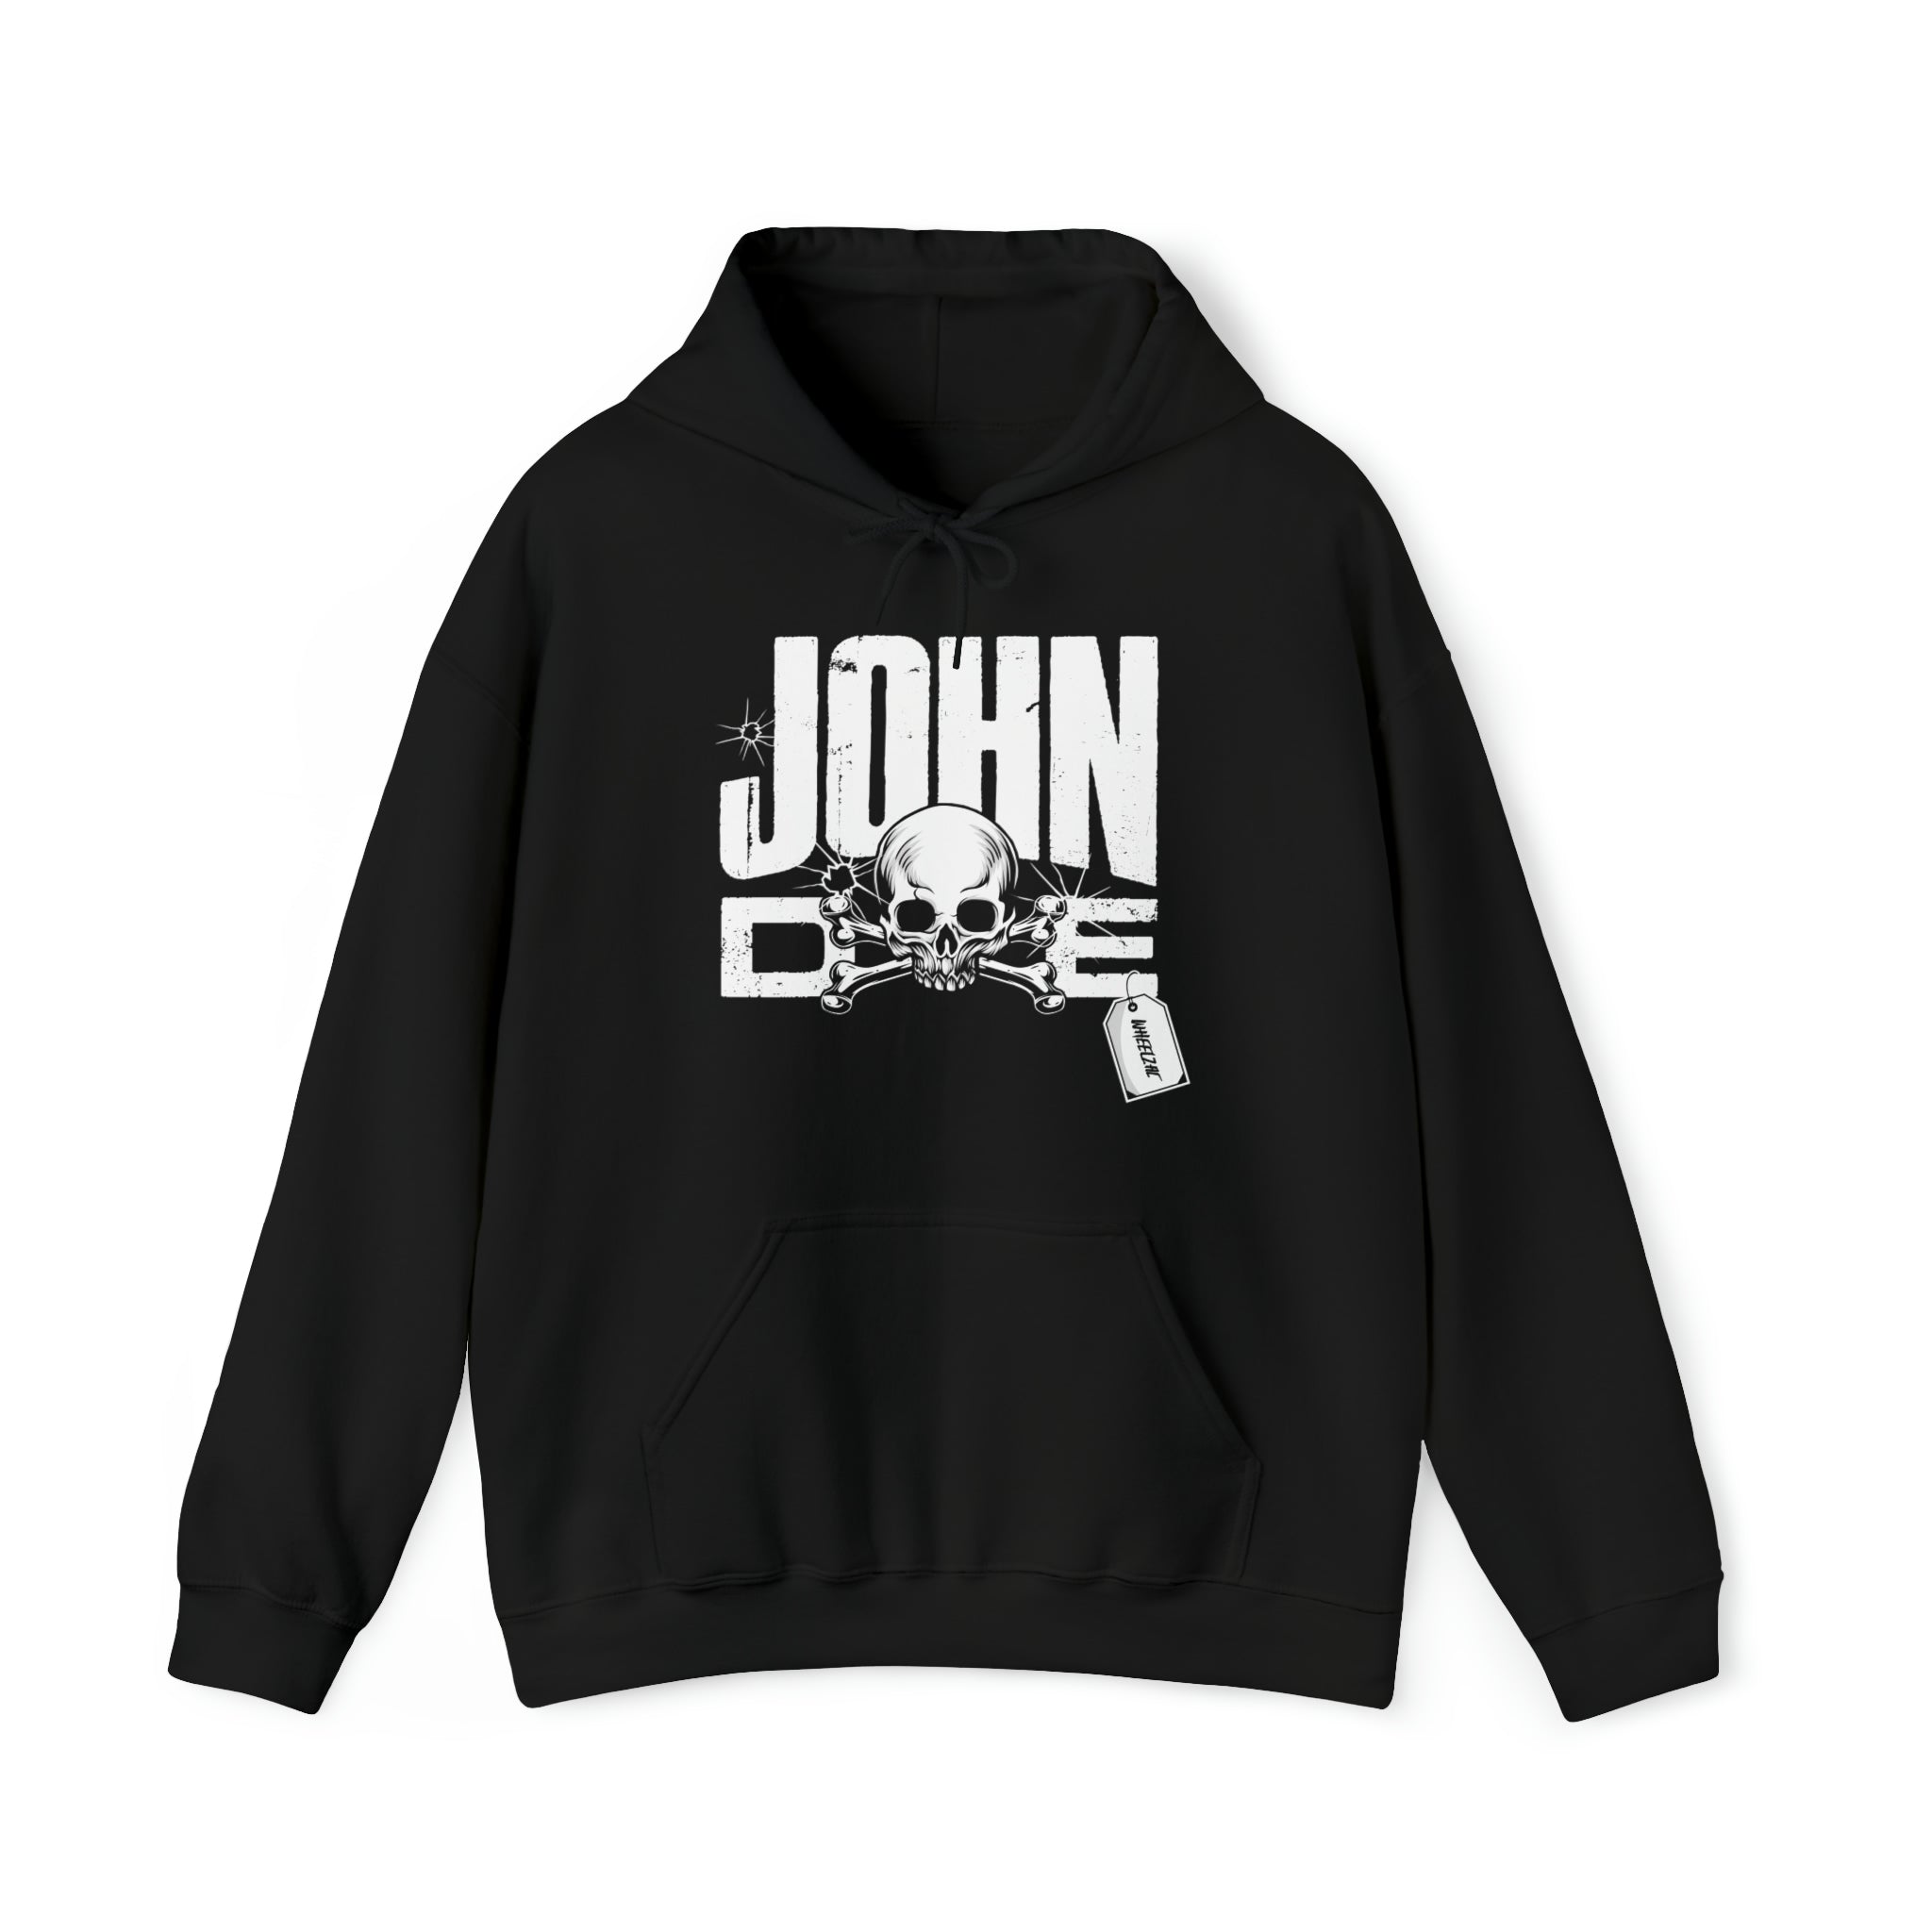 Plush, warm and comfortable long sleeve hoodie sweatshirt for men featuring a unique skull and crossbones John Doe graphic.